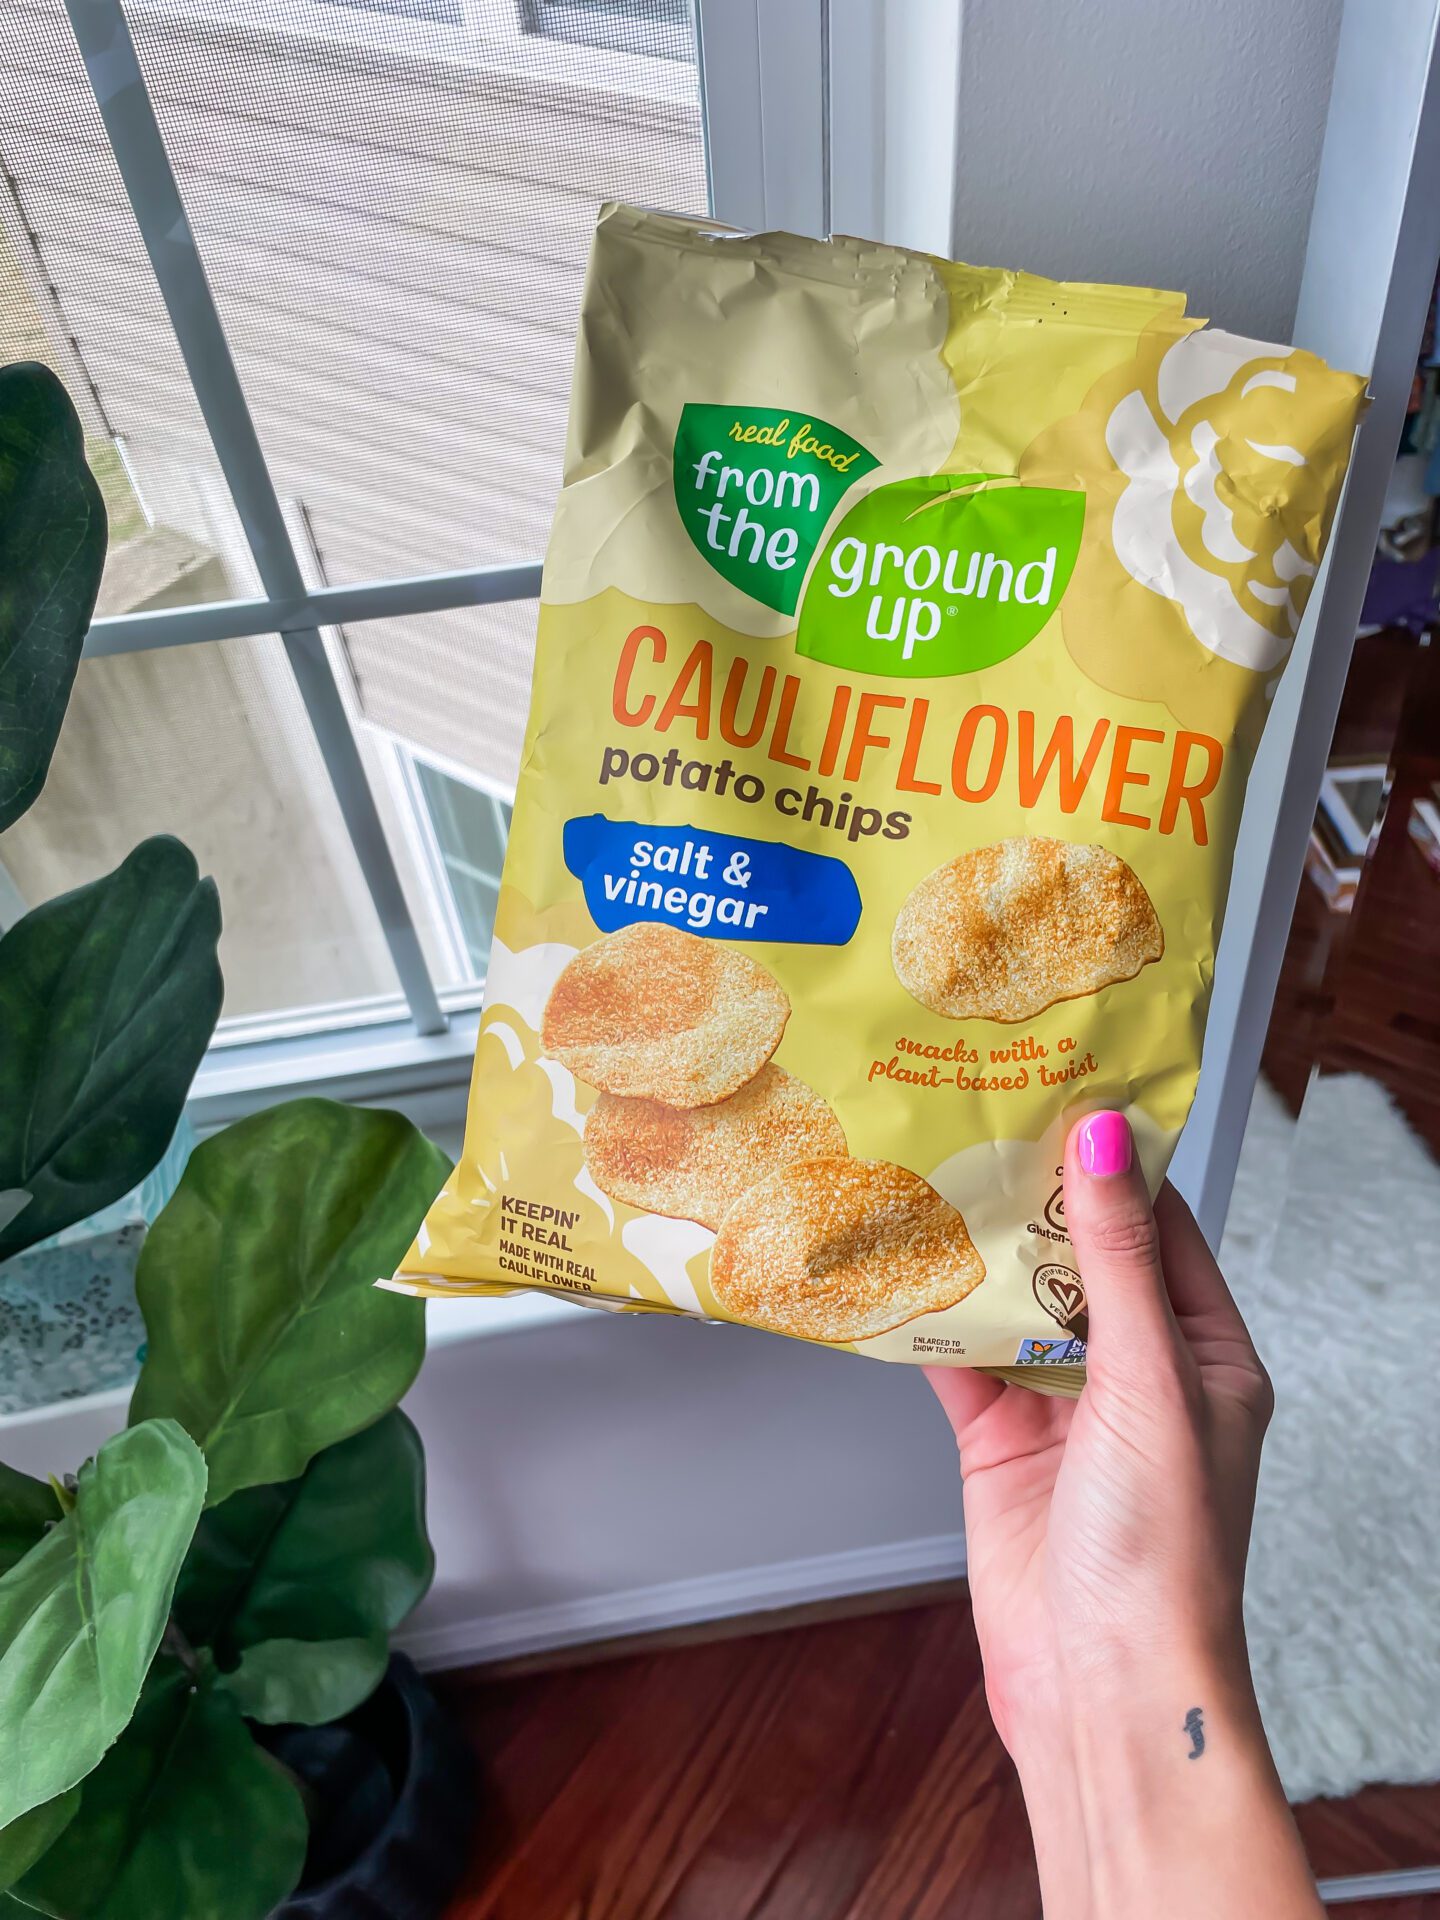 Cauliflower chips - COOL SH*T I LOVELOVELOVE - July's Monthly Favorites on Coming Up Roses